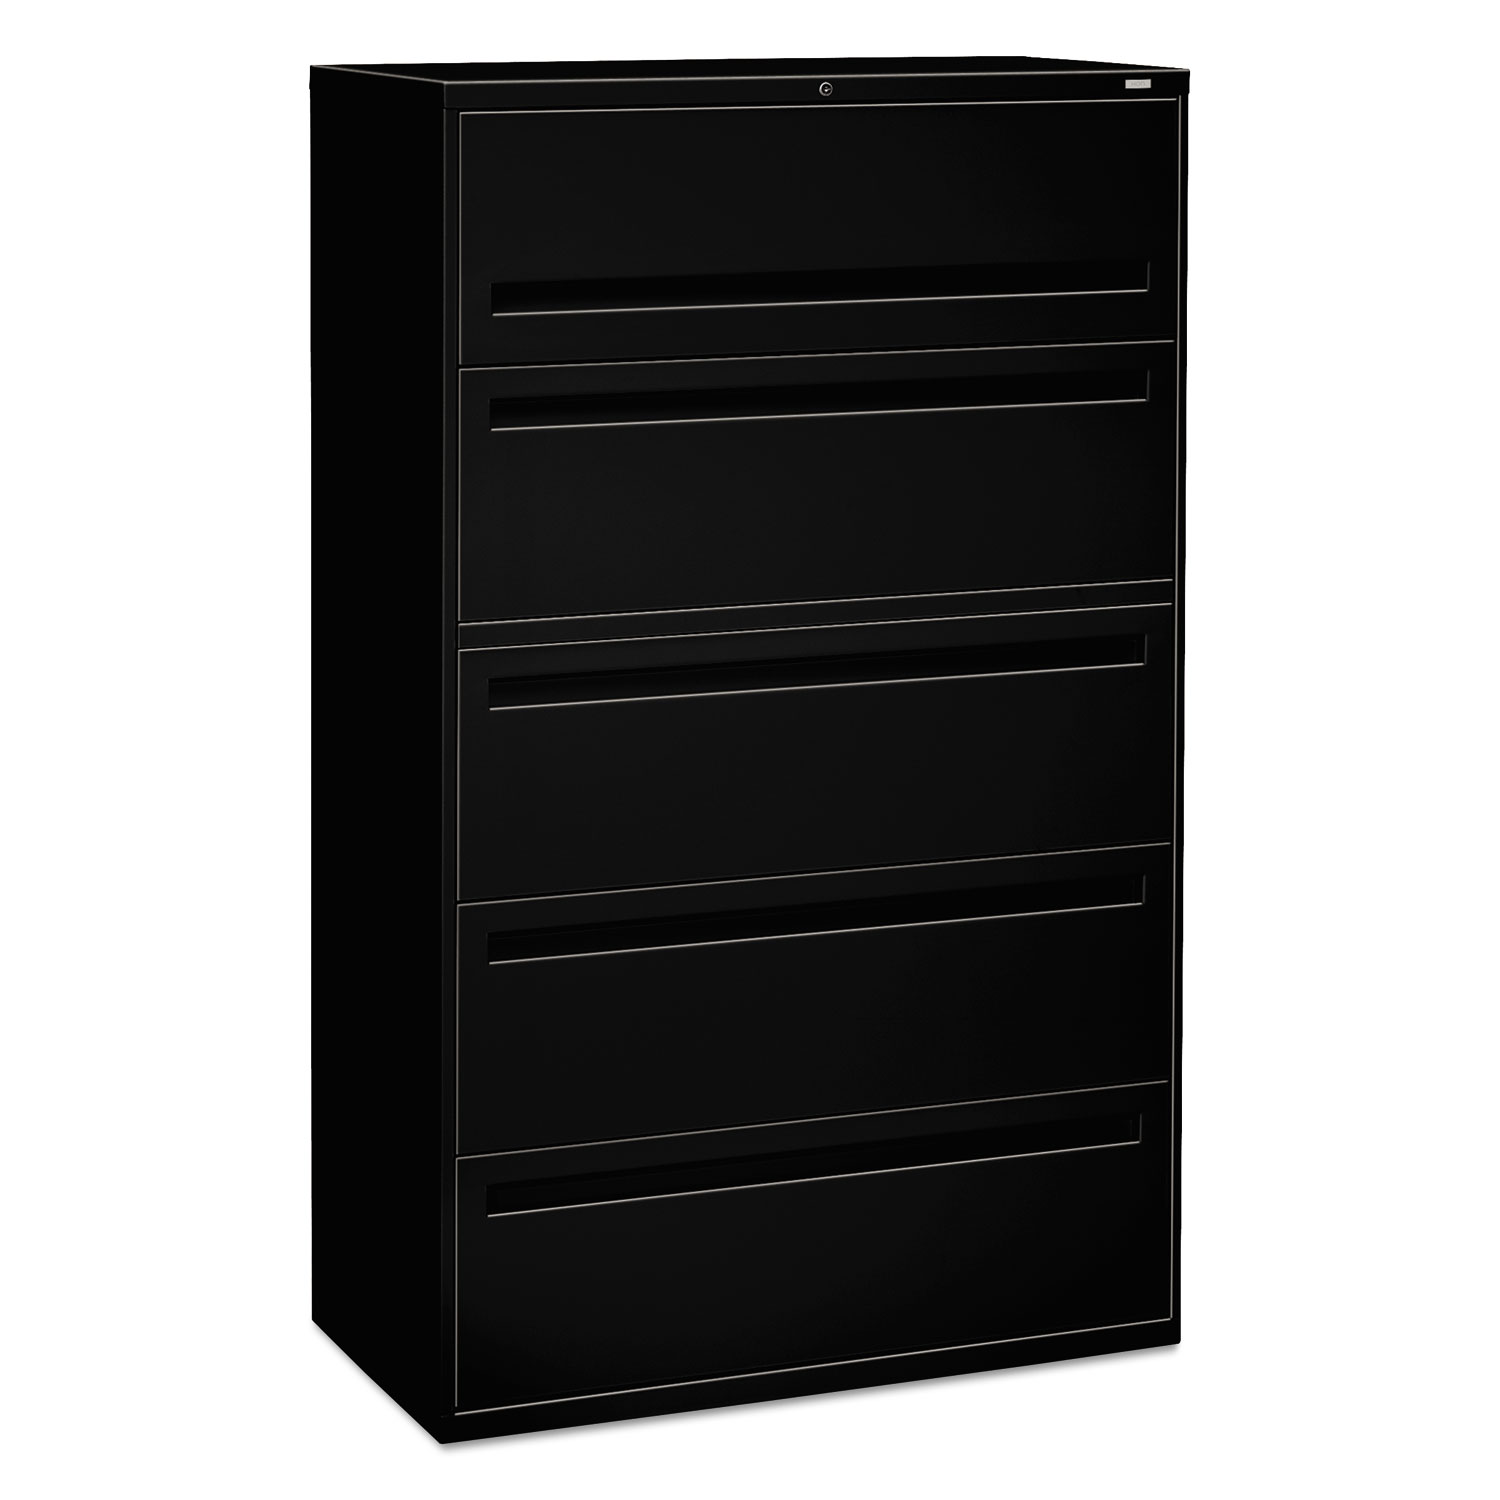  HON H795.L.P 700 Series Five-Drawer Lateral File with Roll-Out Shelves, 42w x 18d x 64.25h, Black (HON795LP) 